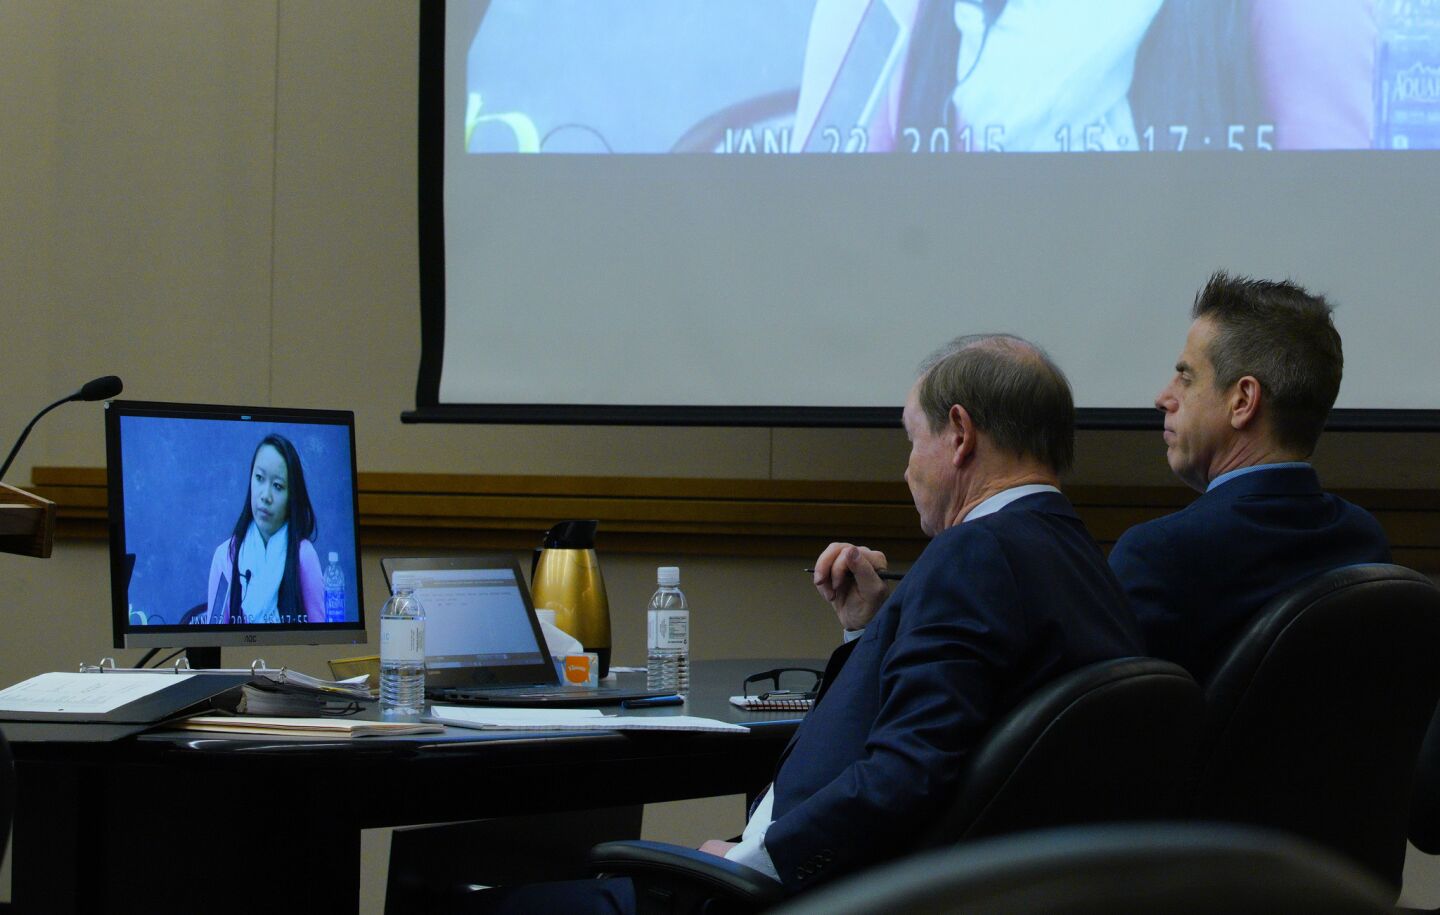 Adam Shacknai (right) sits next to his attorney, Dan Webb as a video is played of Rebecca Zahau’s younger sister Xena Zahau taken during her January 22, 2015 deposition.